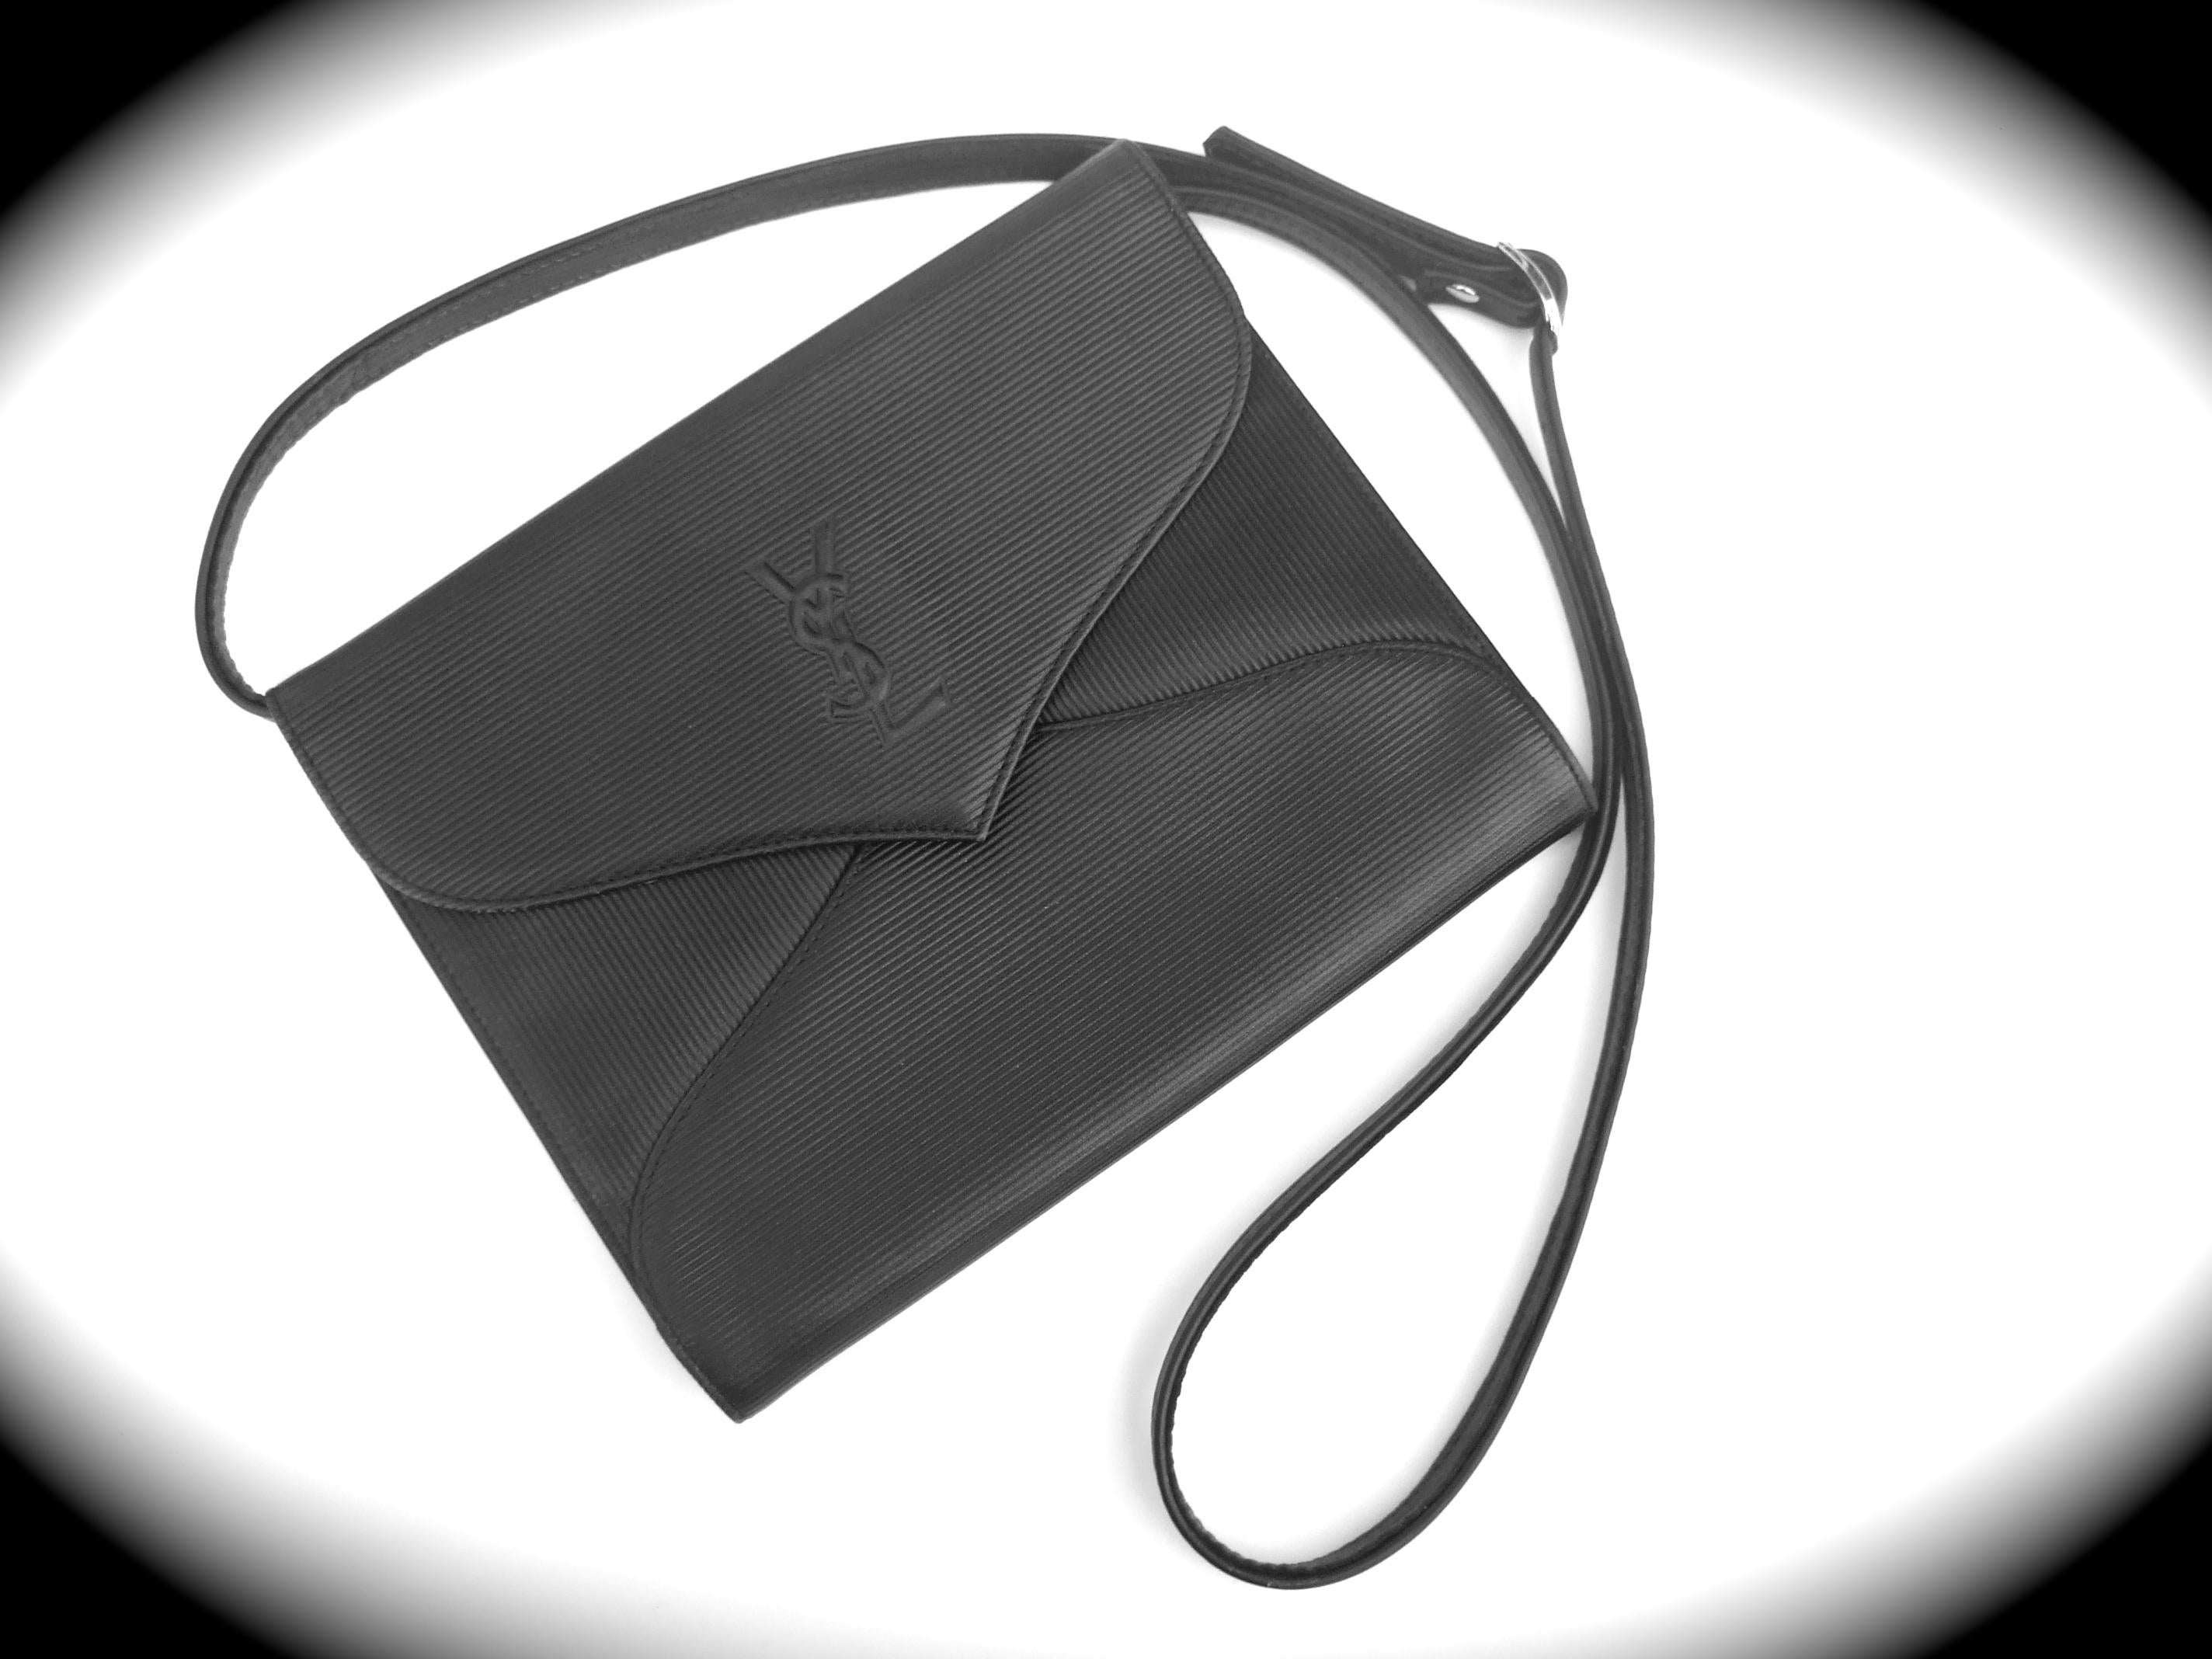 Yves Saint Laurent Chic black leather versatile clutch - shoulder bag c 1980s 
The black leather covering is designed with subtle vertical and horizontal impressed linear bands

The front exterior flap cover is adorned with Saint Laurent's embossed